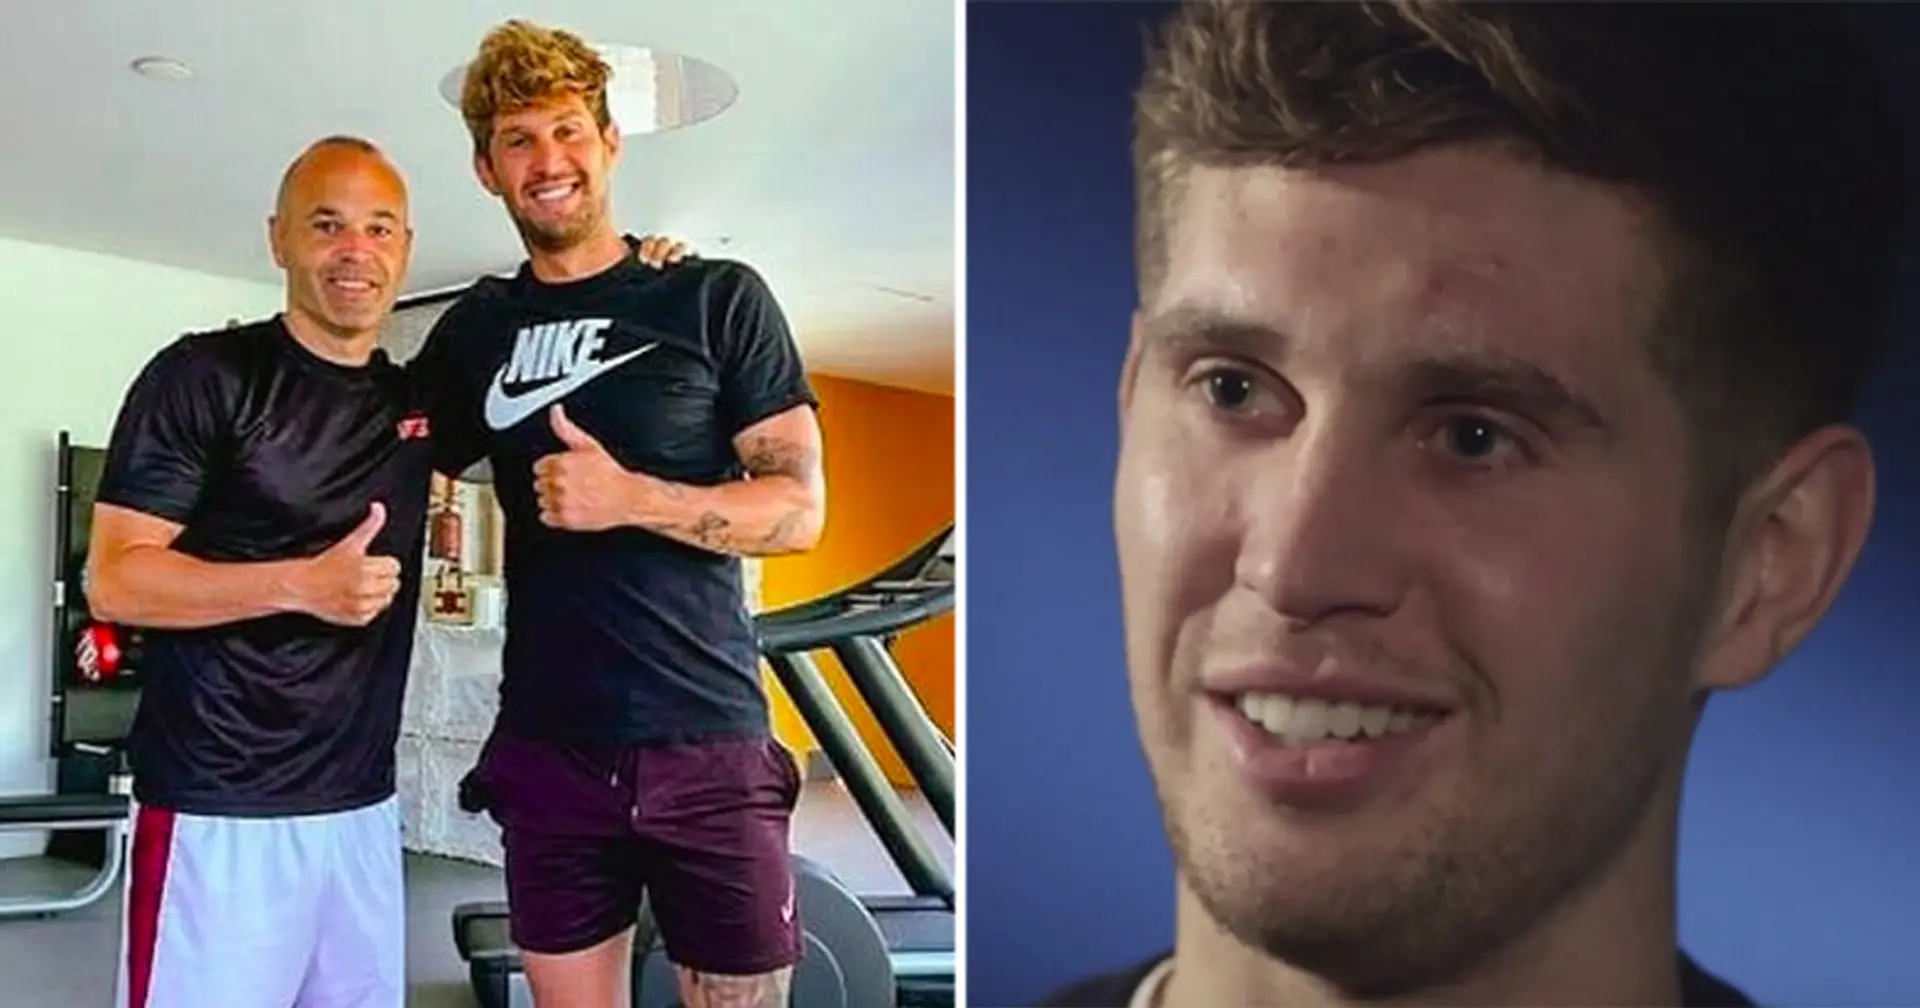 'He was on the treadmill. I was a bit shocked': John Stones opens up on running into Iniesta in gym